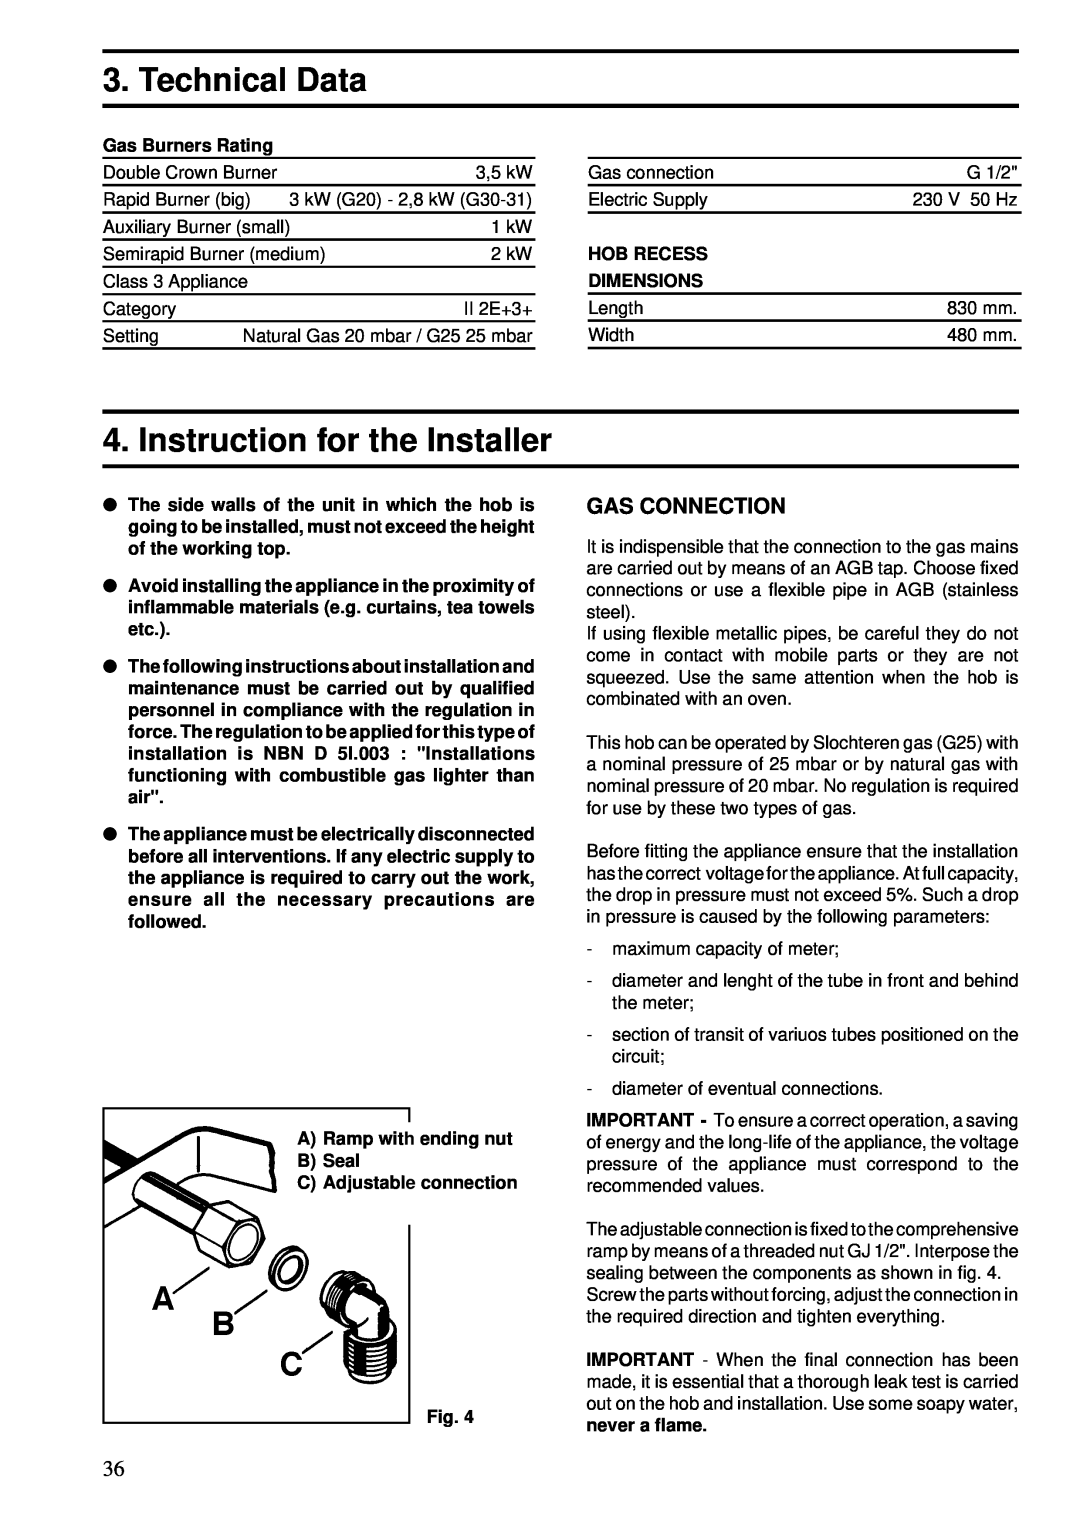 Zanussi ZGF 983 manual Technical Data, Instruction for the Installer, Gas Connection 